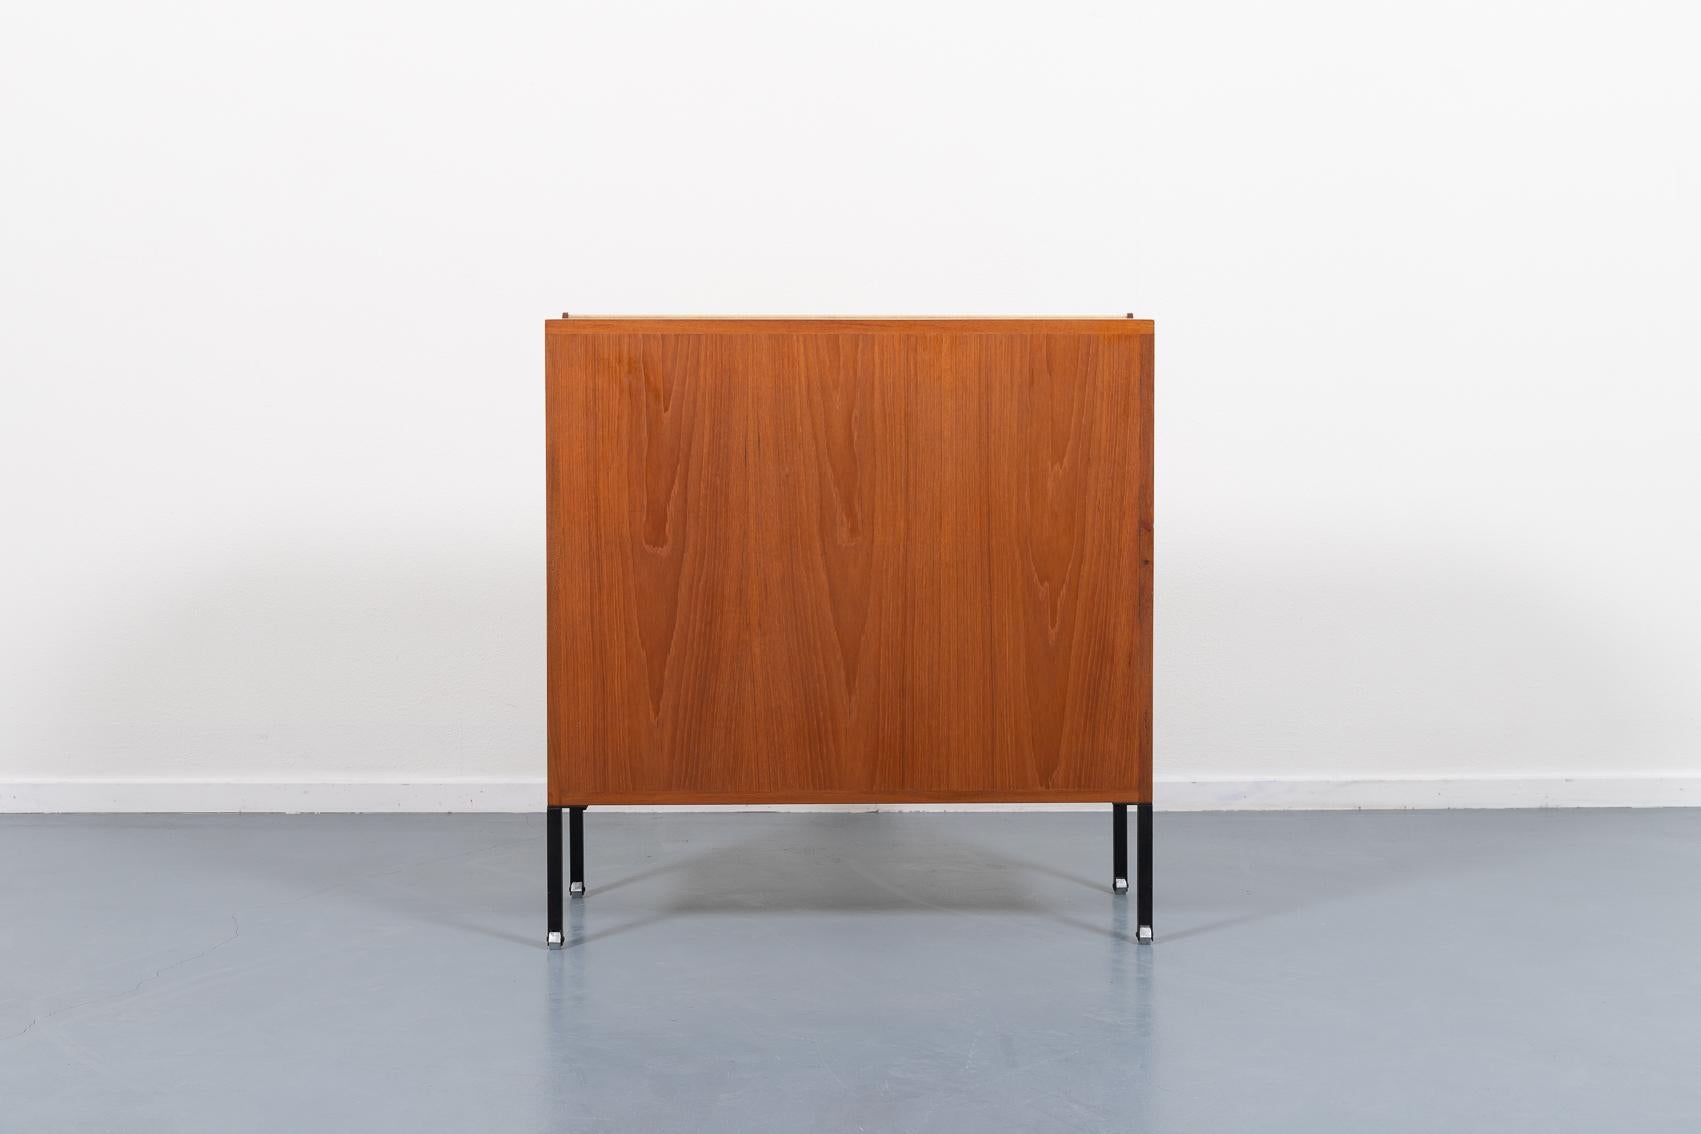 Architectural Italian Modern free standing credenza/storage cabinet from 1960’s designed by Ico Parisi for MIM. It features a flap door covered in beige velvet fabric, shelf and and storage space behind it. Equipped with black coated steel legs and